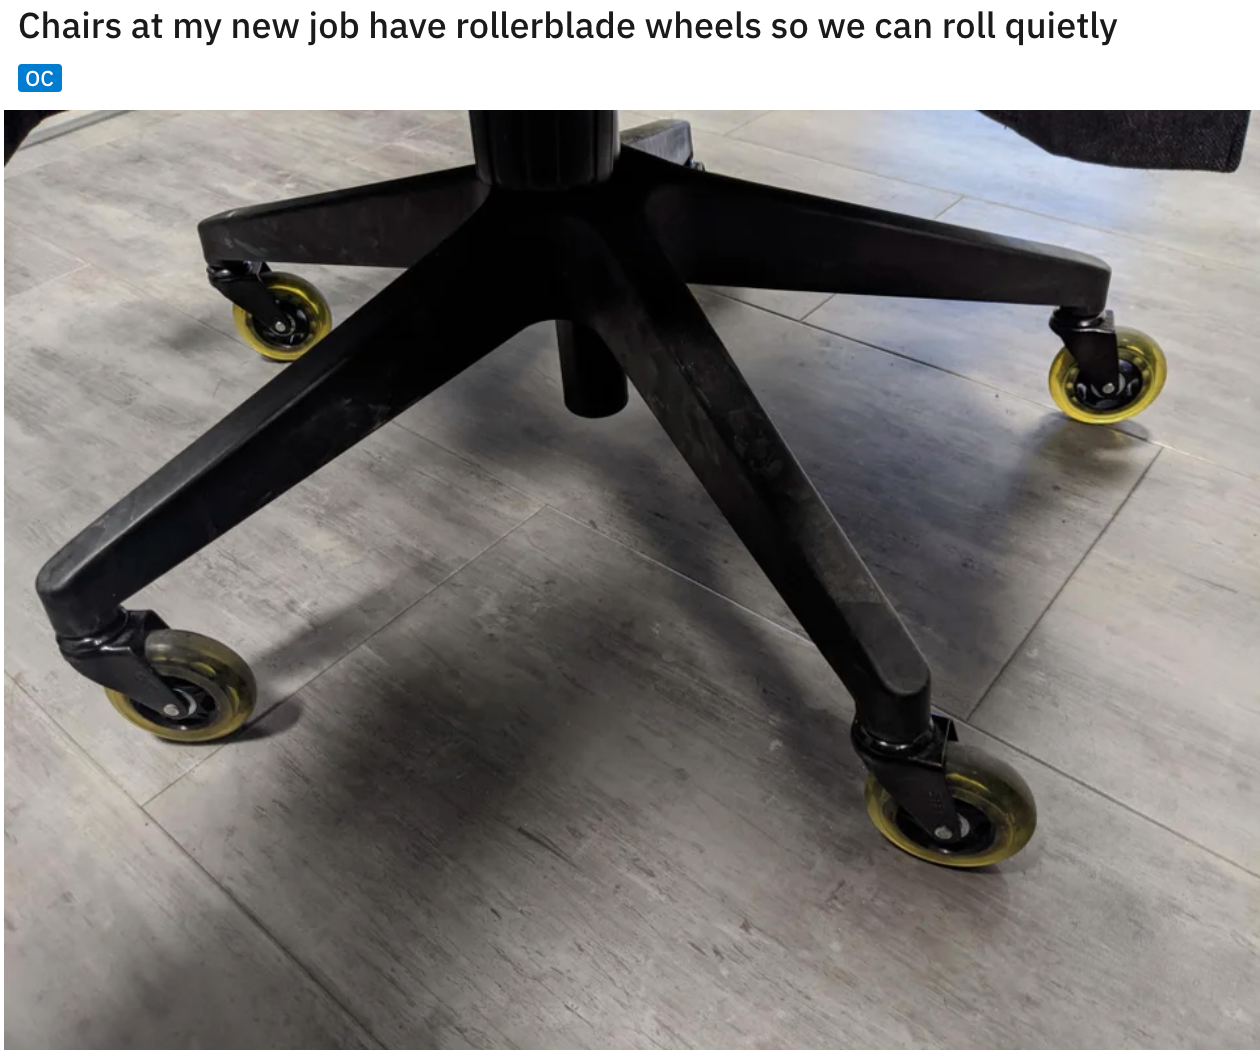 cool and funny pics - Chairs at my new job have rollerblade wheels so we can roll quietly